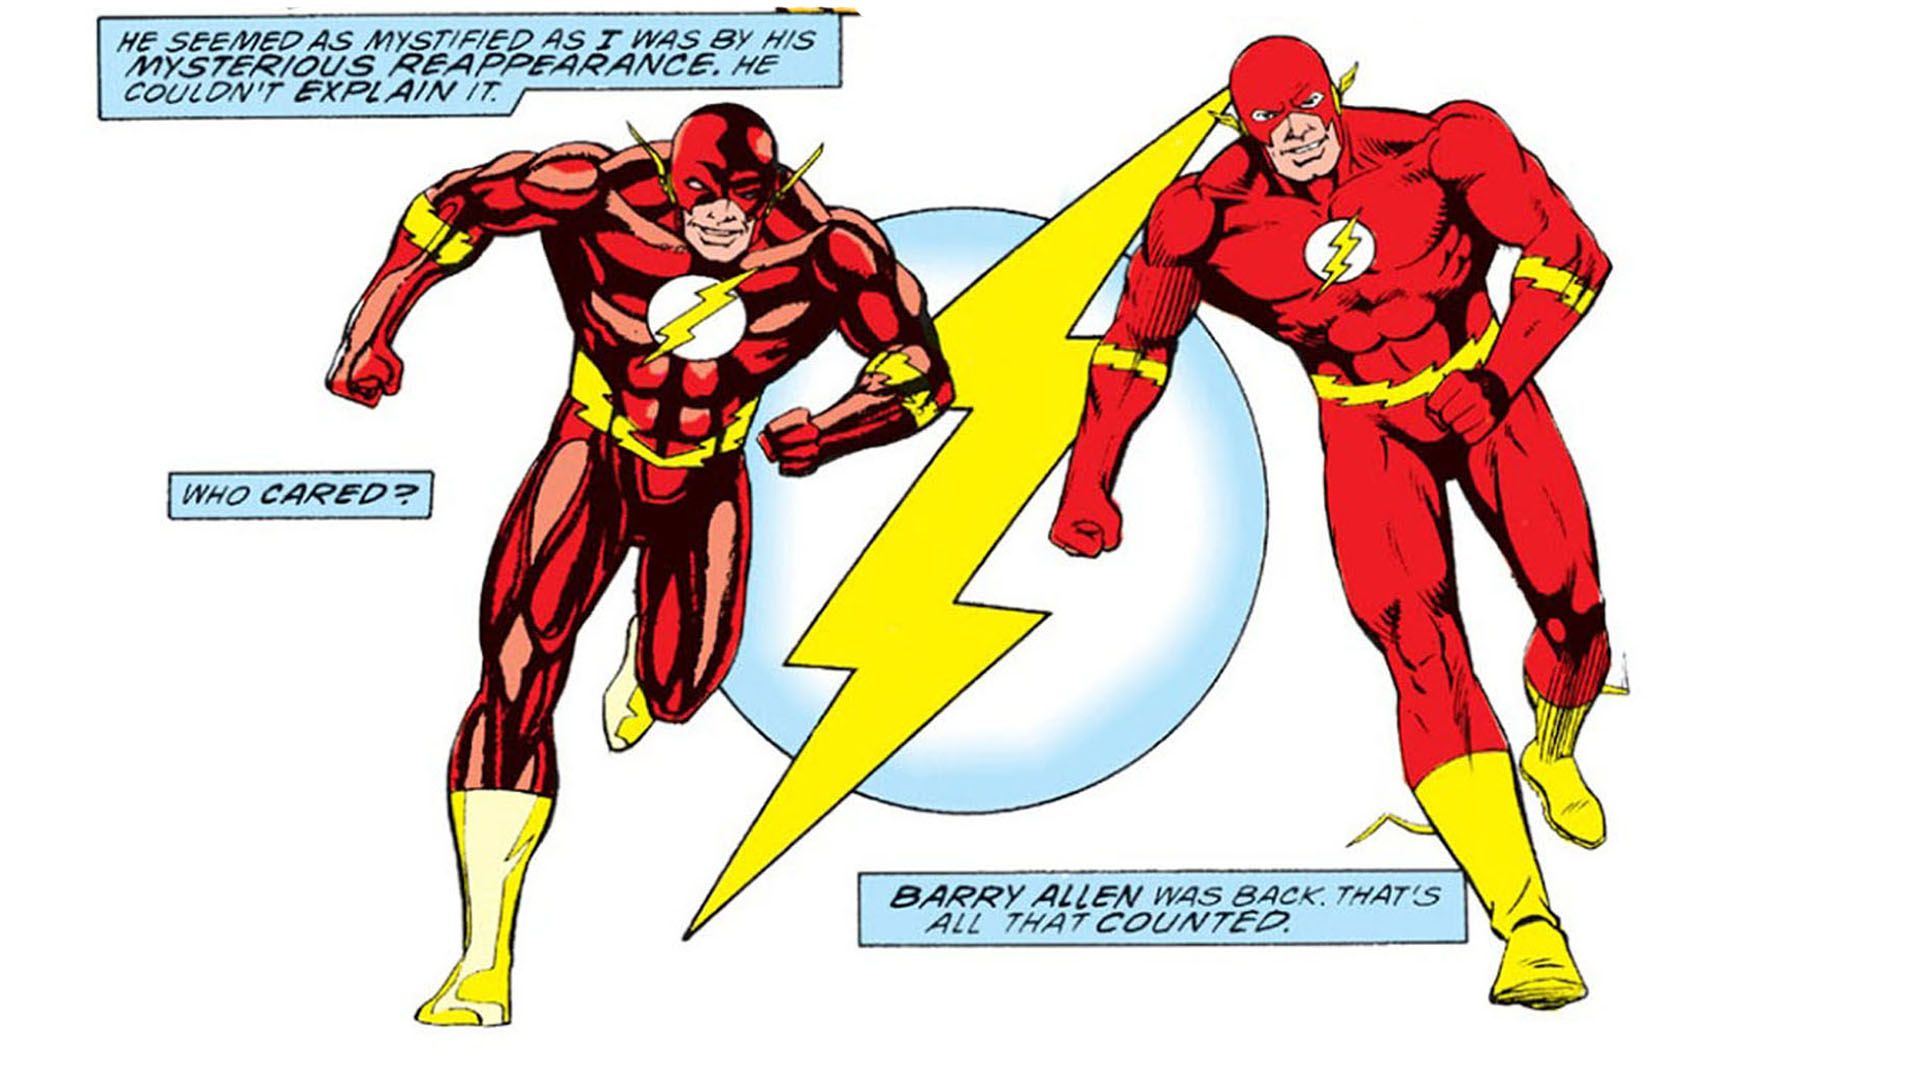 reappearance of Barry after 20 years